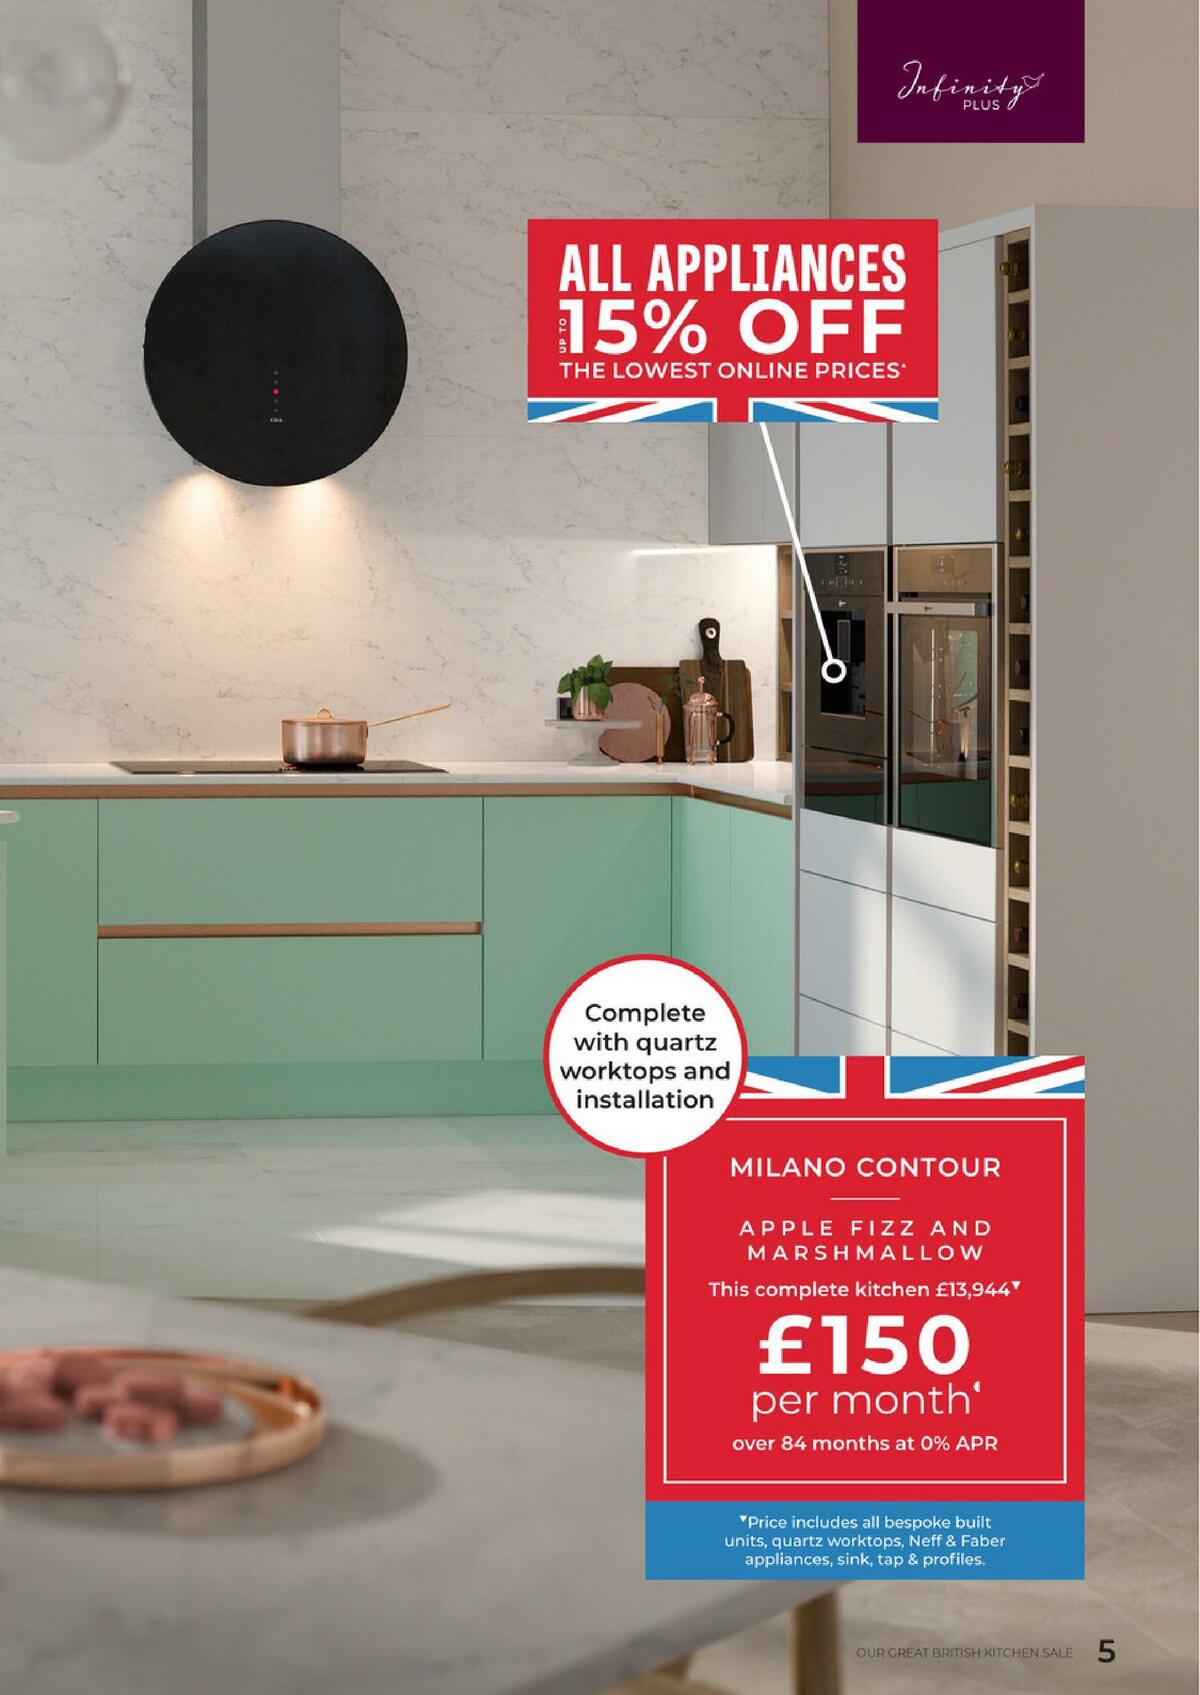 Wren Kitchens Offers from 5 June